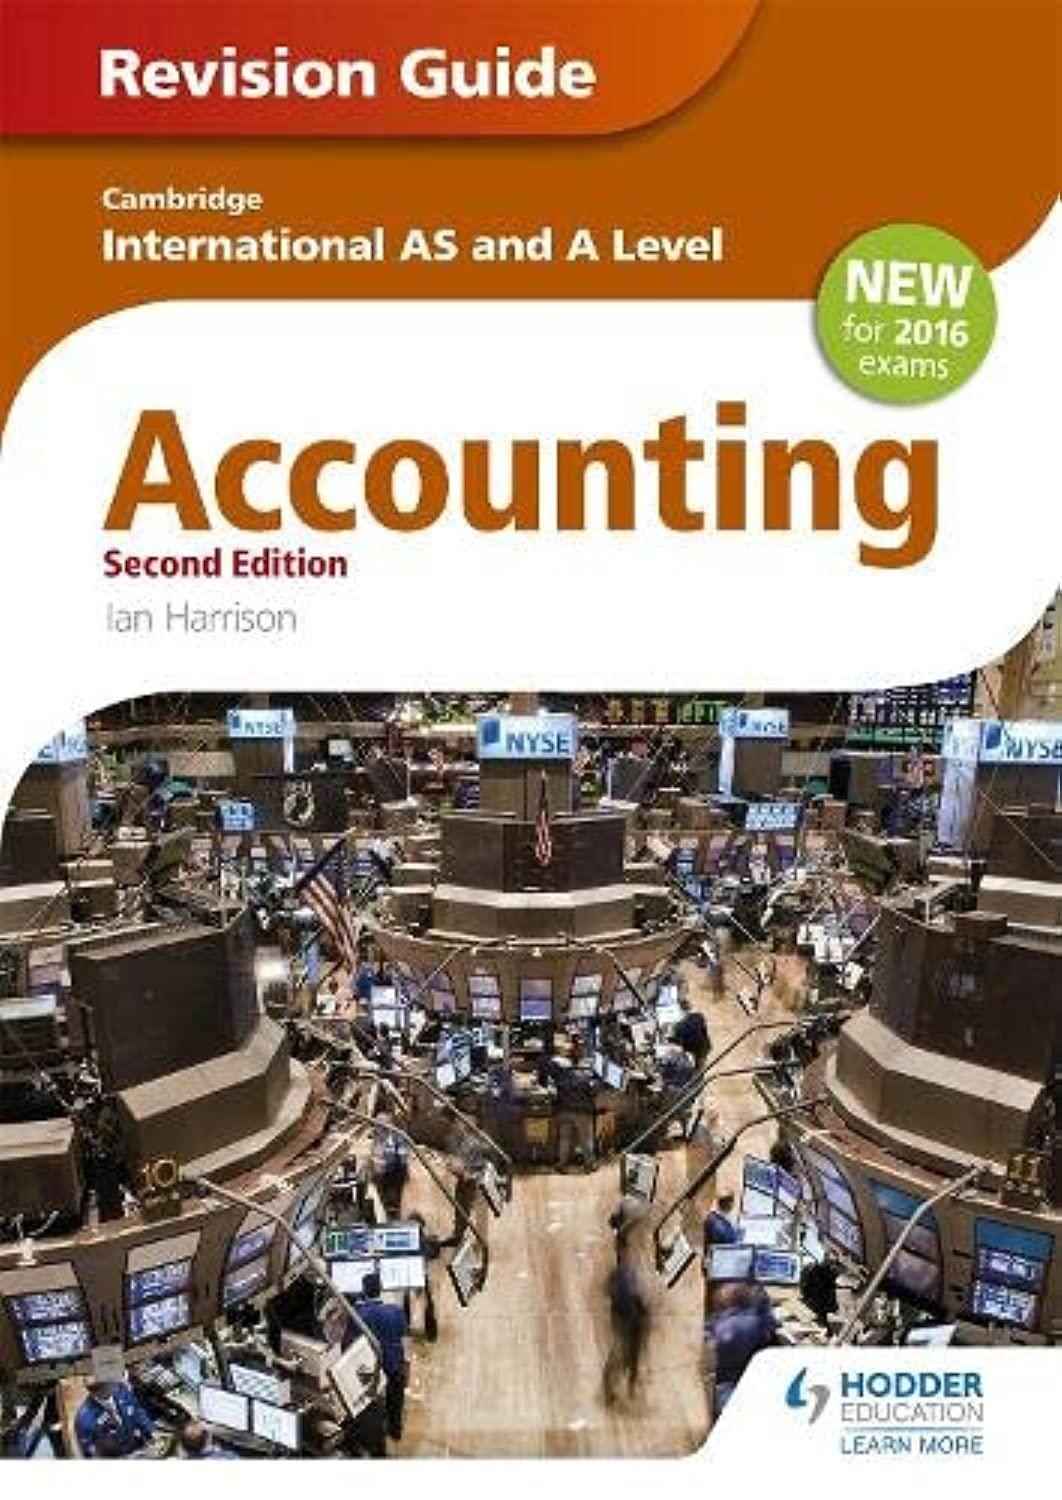 cambridge international as/a level accounting revision guide 2nd edition ian harrison 1471847675,